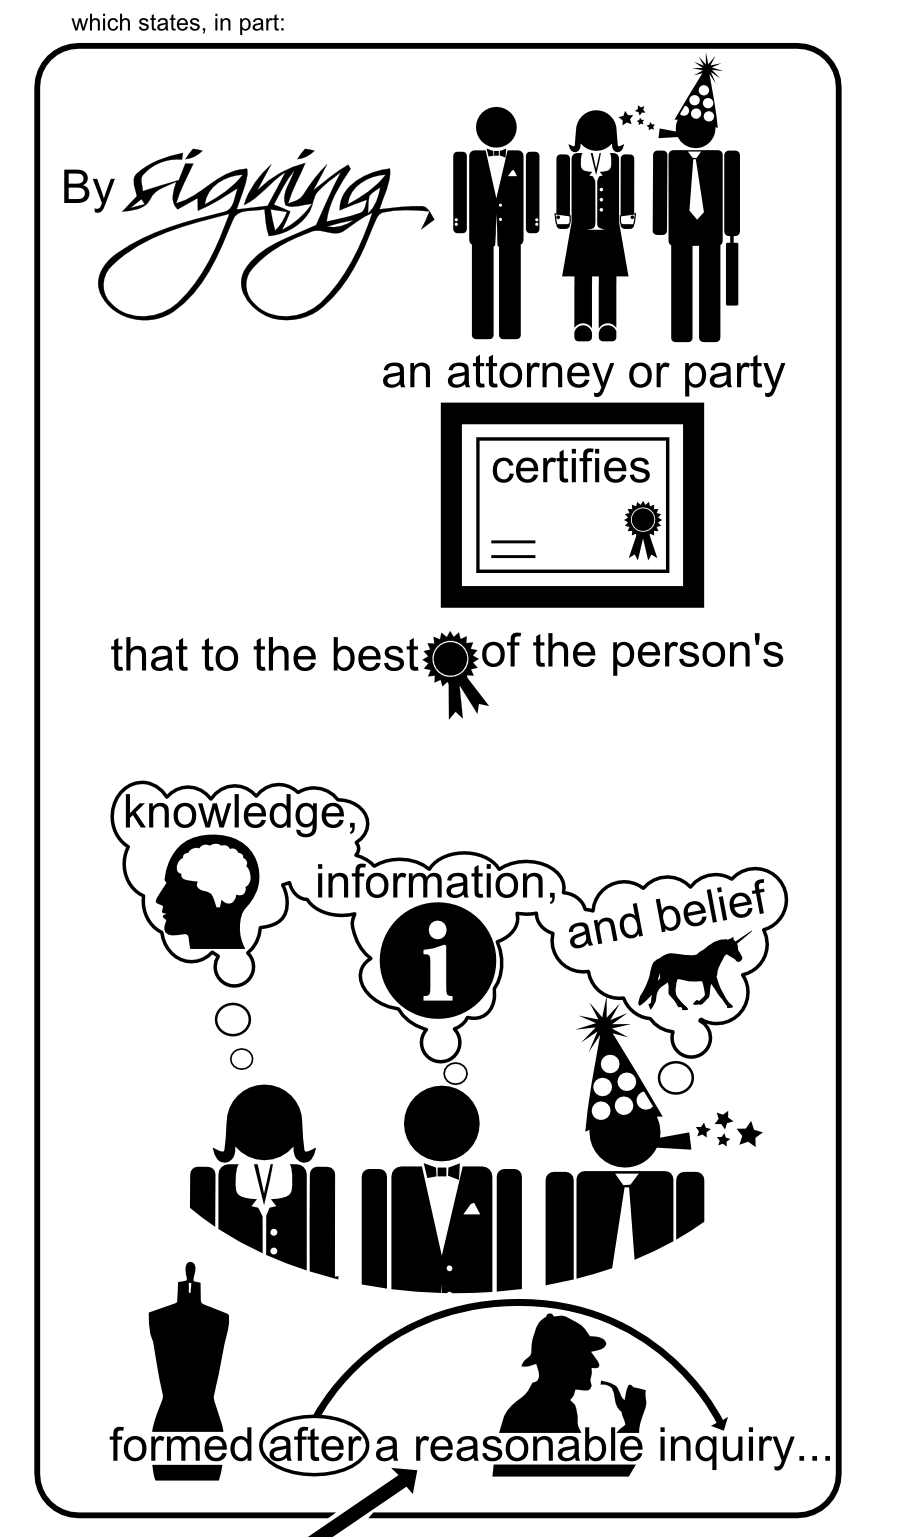 The court bases the analysis on Rule 26(g); improper certification of responses By an attorney or party certifies that to the best of the person's information, and belief knowledge, formed after a reasonable inquiry... which states, in part: